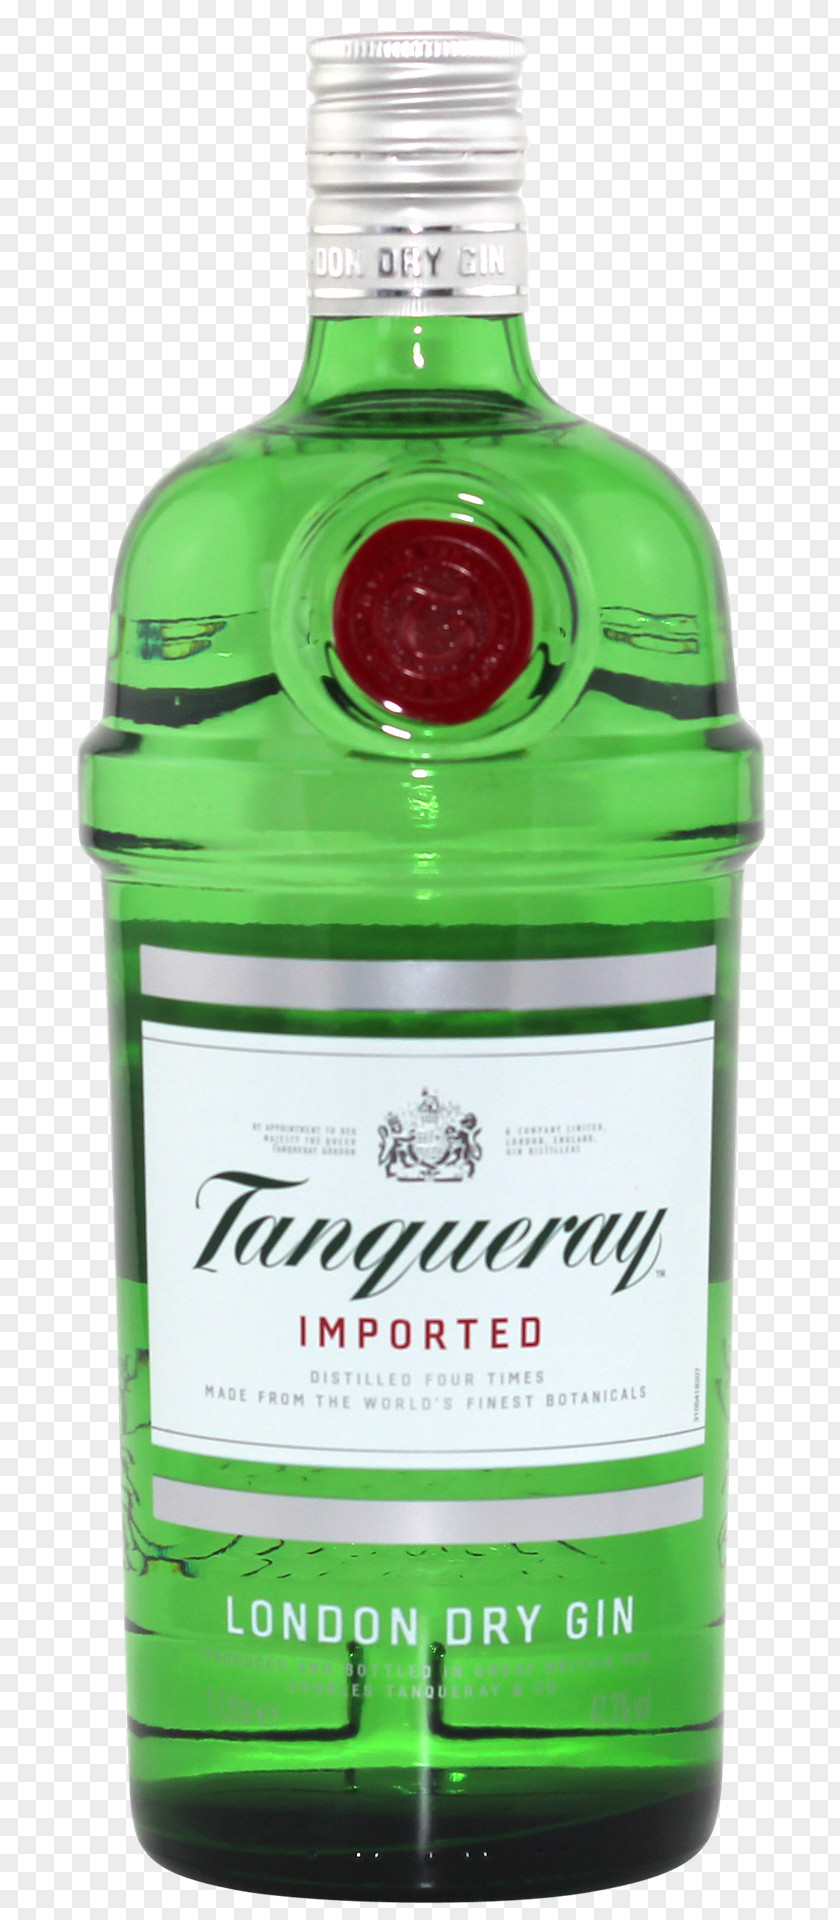 Vodka Liqueur Tanqueray Gin And Tonic Distilled Beverage PNG